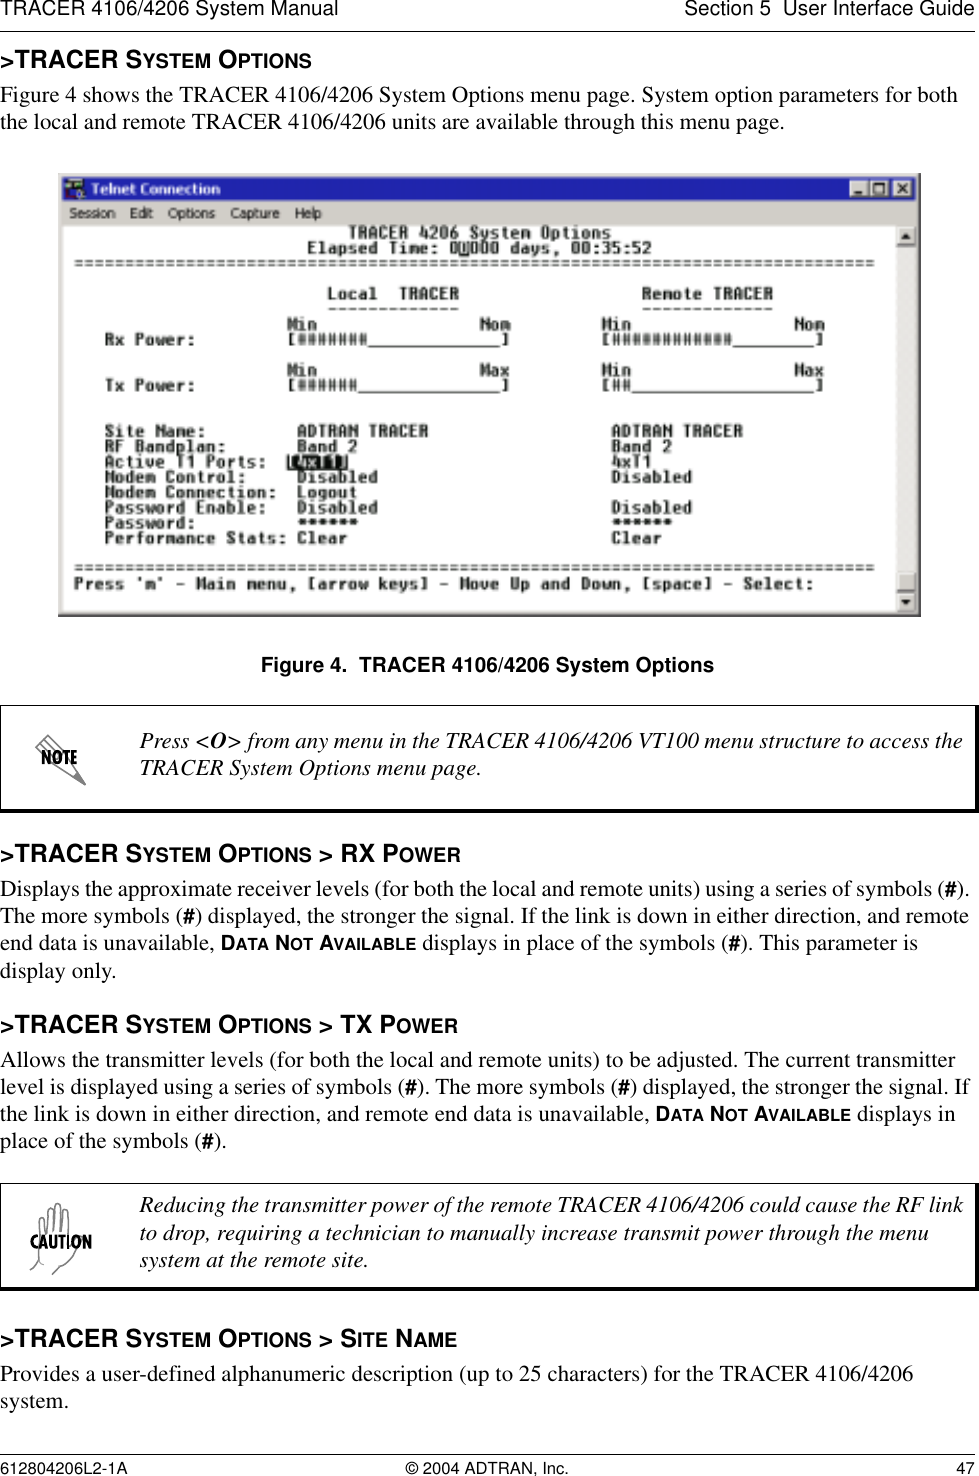 TRACER 4106/4206 System Manual Section 5  User Interface Guide612804206L2-1A © 2004 ADTRAN, Inc. 47&gt;TRACER SYSTEM OPTIONSFigure 4 shows the TRACER 4106/4206 System Options menu page. System option parameters for both the local and remote TRACER 4106/4206 units are available through this menu page.Figure 4.  TRACER 4106/4206 System Options&gt;TRACER SYSTEM OPTIONS &gt; RX POWERDisplays the approximate receiver levels (for both the local and remote units) using a series of symbols (#). The more symbols (#) displayed, the stronger the signal. If the link is down in either direction, and remote end data is unavailable, DATA NOT AVAILABLE displays in place of the symbols (#). This parameter is display only.&gt;TRACER SYSTEM OPTIONS &gt; TX POWERAllows the transmitter levels (for both the local and remote units) to be adjusted. The current transmitter level is displayed using a series of symbols (#). The more symbols (#) displayed, the stronger the signal. If the link is down in either direction, and remote end data is unavailable, DATA NOT AVAILABLE displays in place of the symbols (#).&gt;TRACER SYSTEM OPTIONS &gt; SITE NAMEProvides a user-defined alphanumeric description (up to 25 characters) for the TRACER 4106/4206 system.Press &lt;O&gt; from any menu in the TRACER 4106/4206 VT100 menu structure to access the TRACER System Options menu page.Reducing the transmitter power of the remote TRACER 4106/4206 could cause the RF link to drop, requiring a technician to manually increase transmit power through the menu system at the remote site.